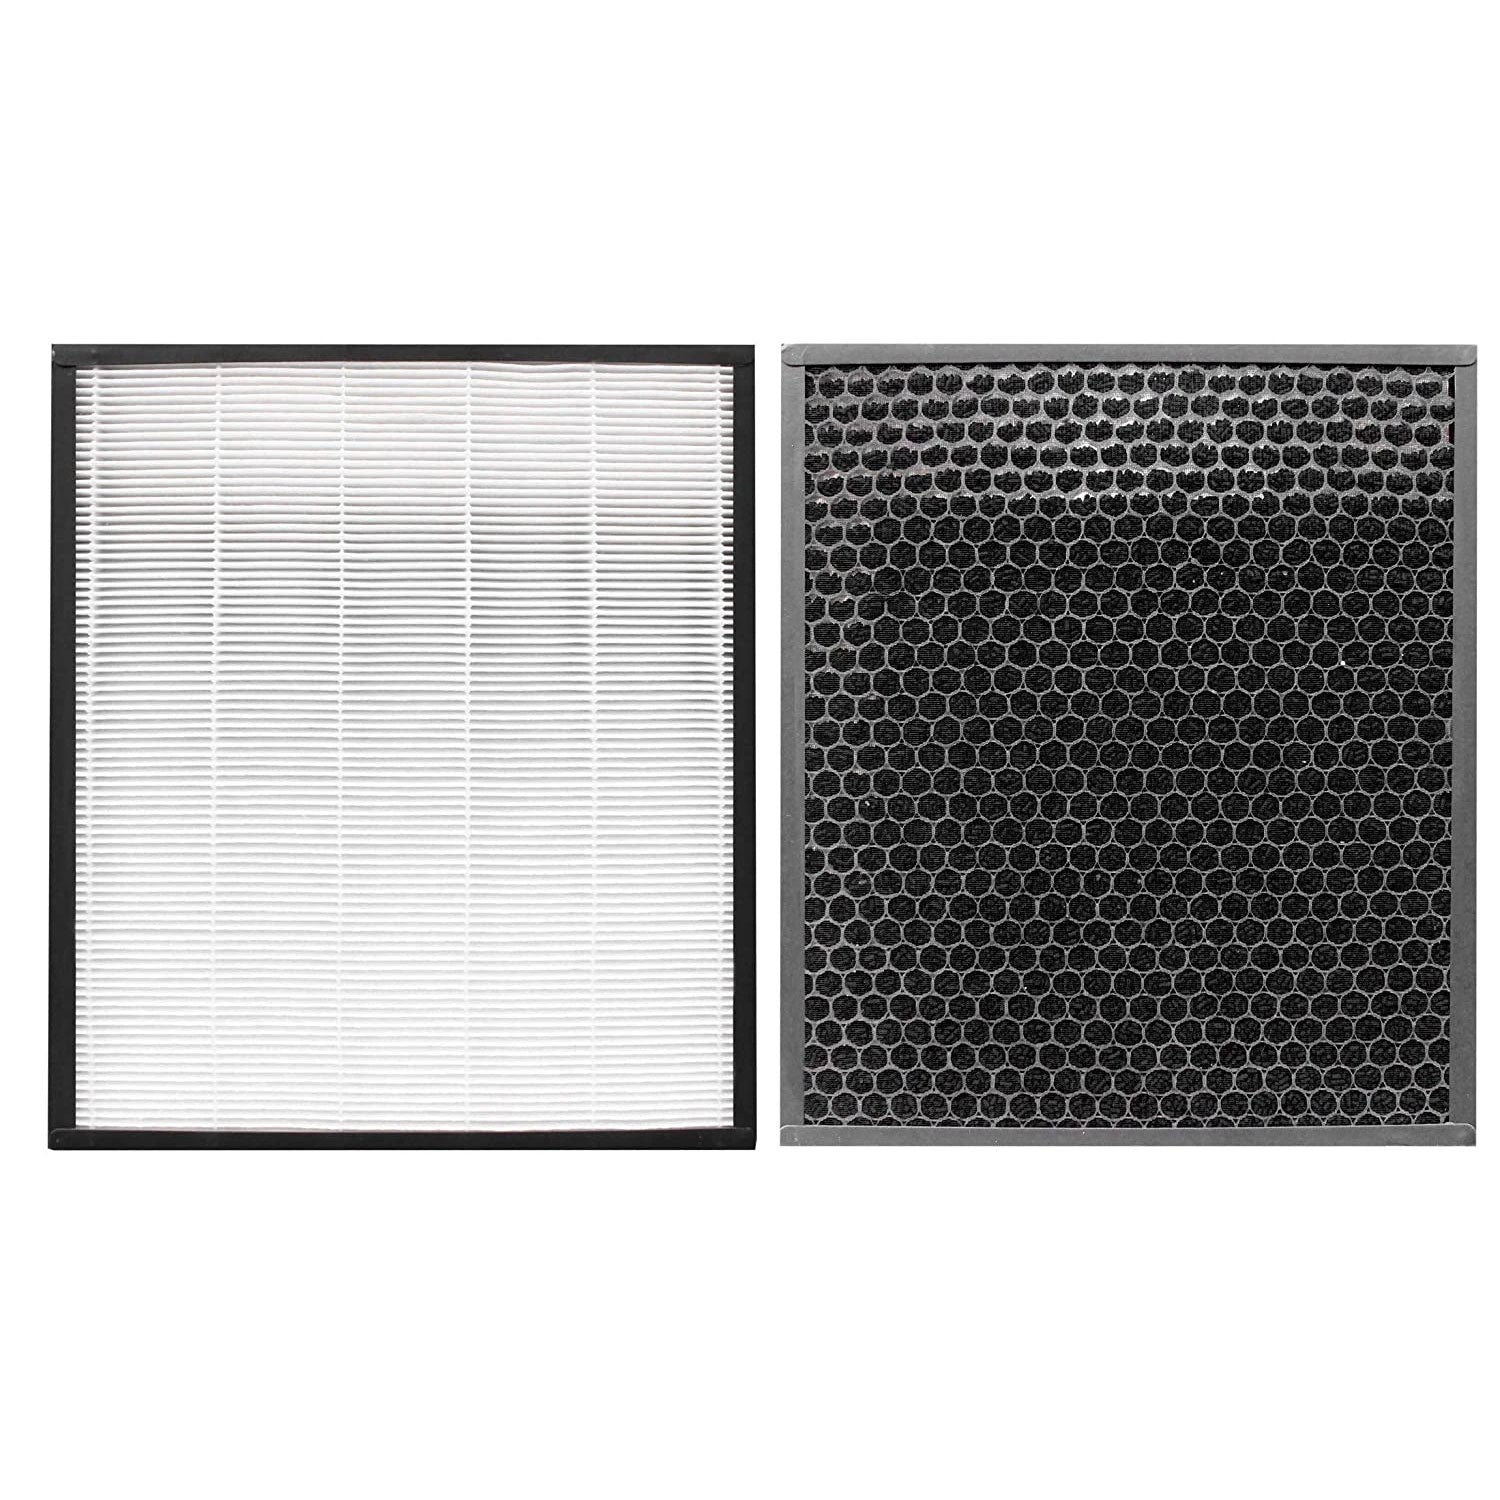 Climestar Compatible Replacement for Levoit Air Purifier LV-PUR131 Filter,  Part LV-PUR131-RF - Includes 1